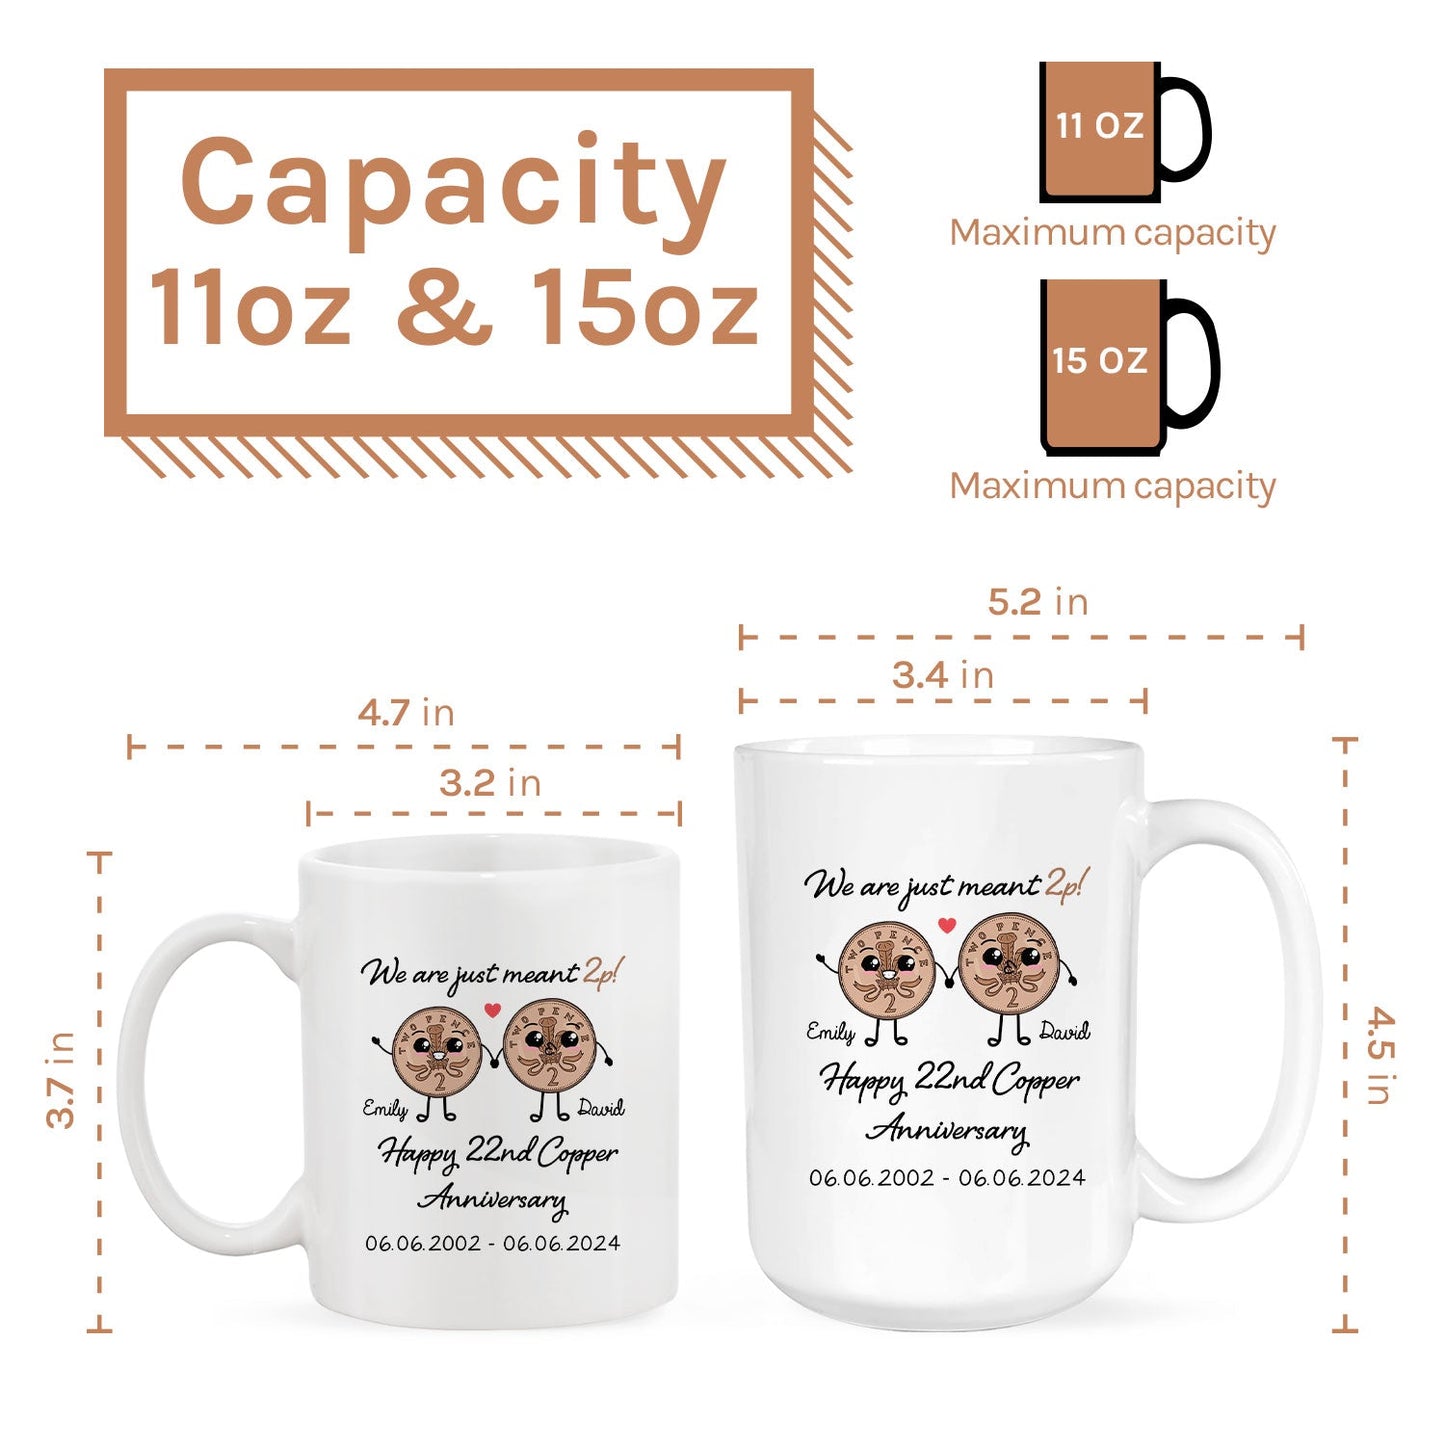 We Are Just Meant 2p - Personalized 22 Year Anniversary gift For Husband or Wife - Custom Mug - MyMindfulGifts